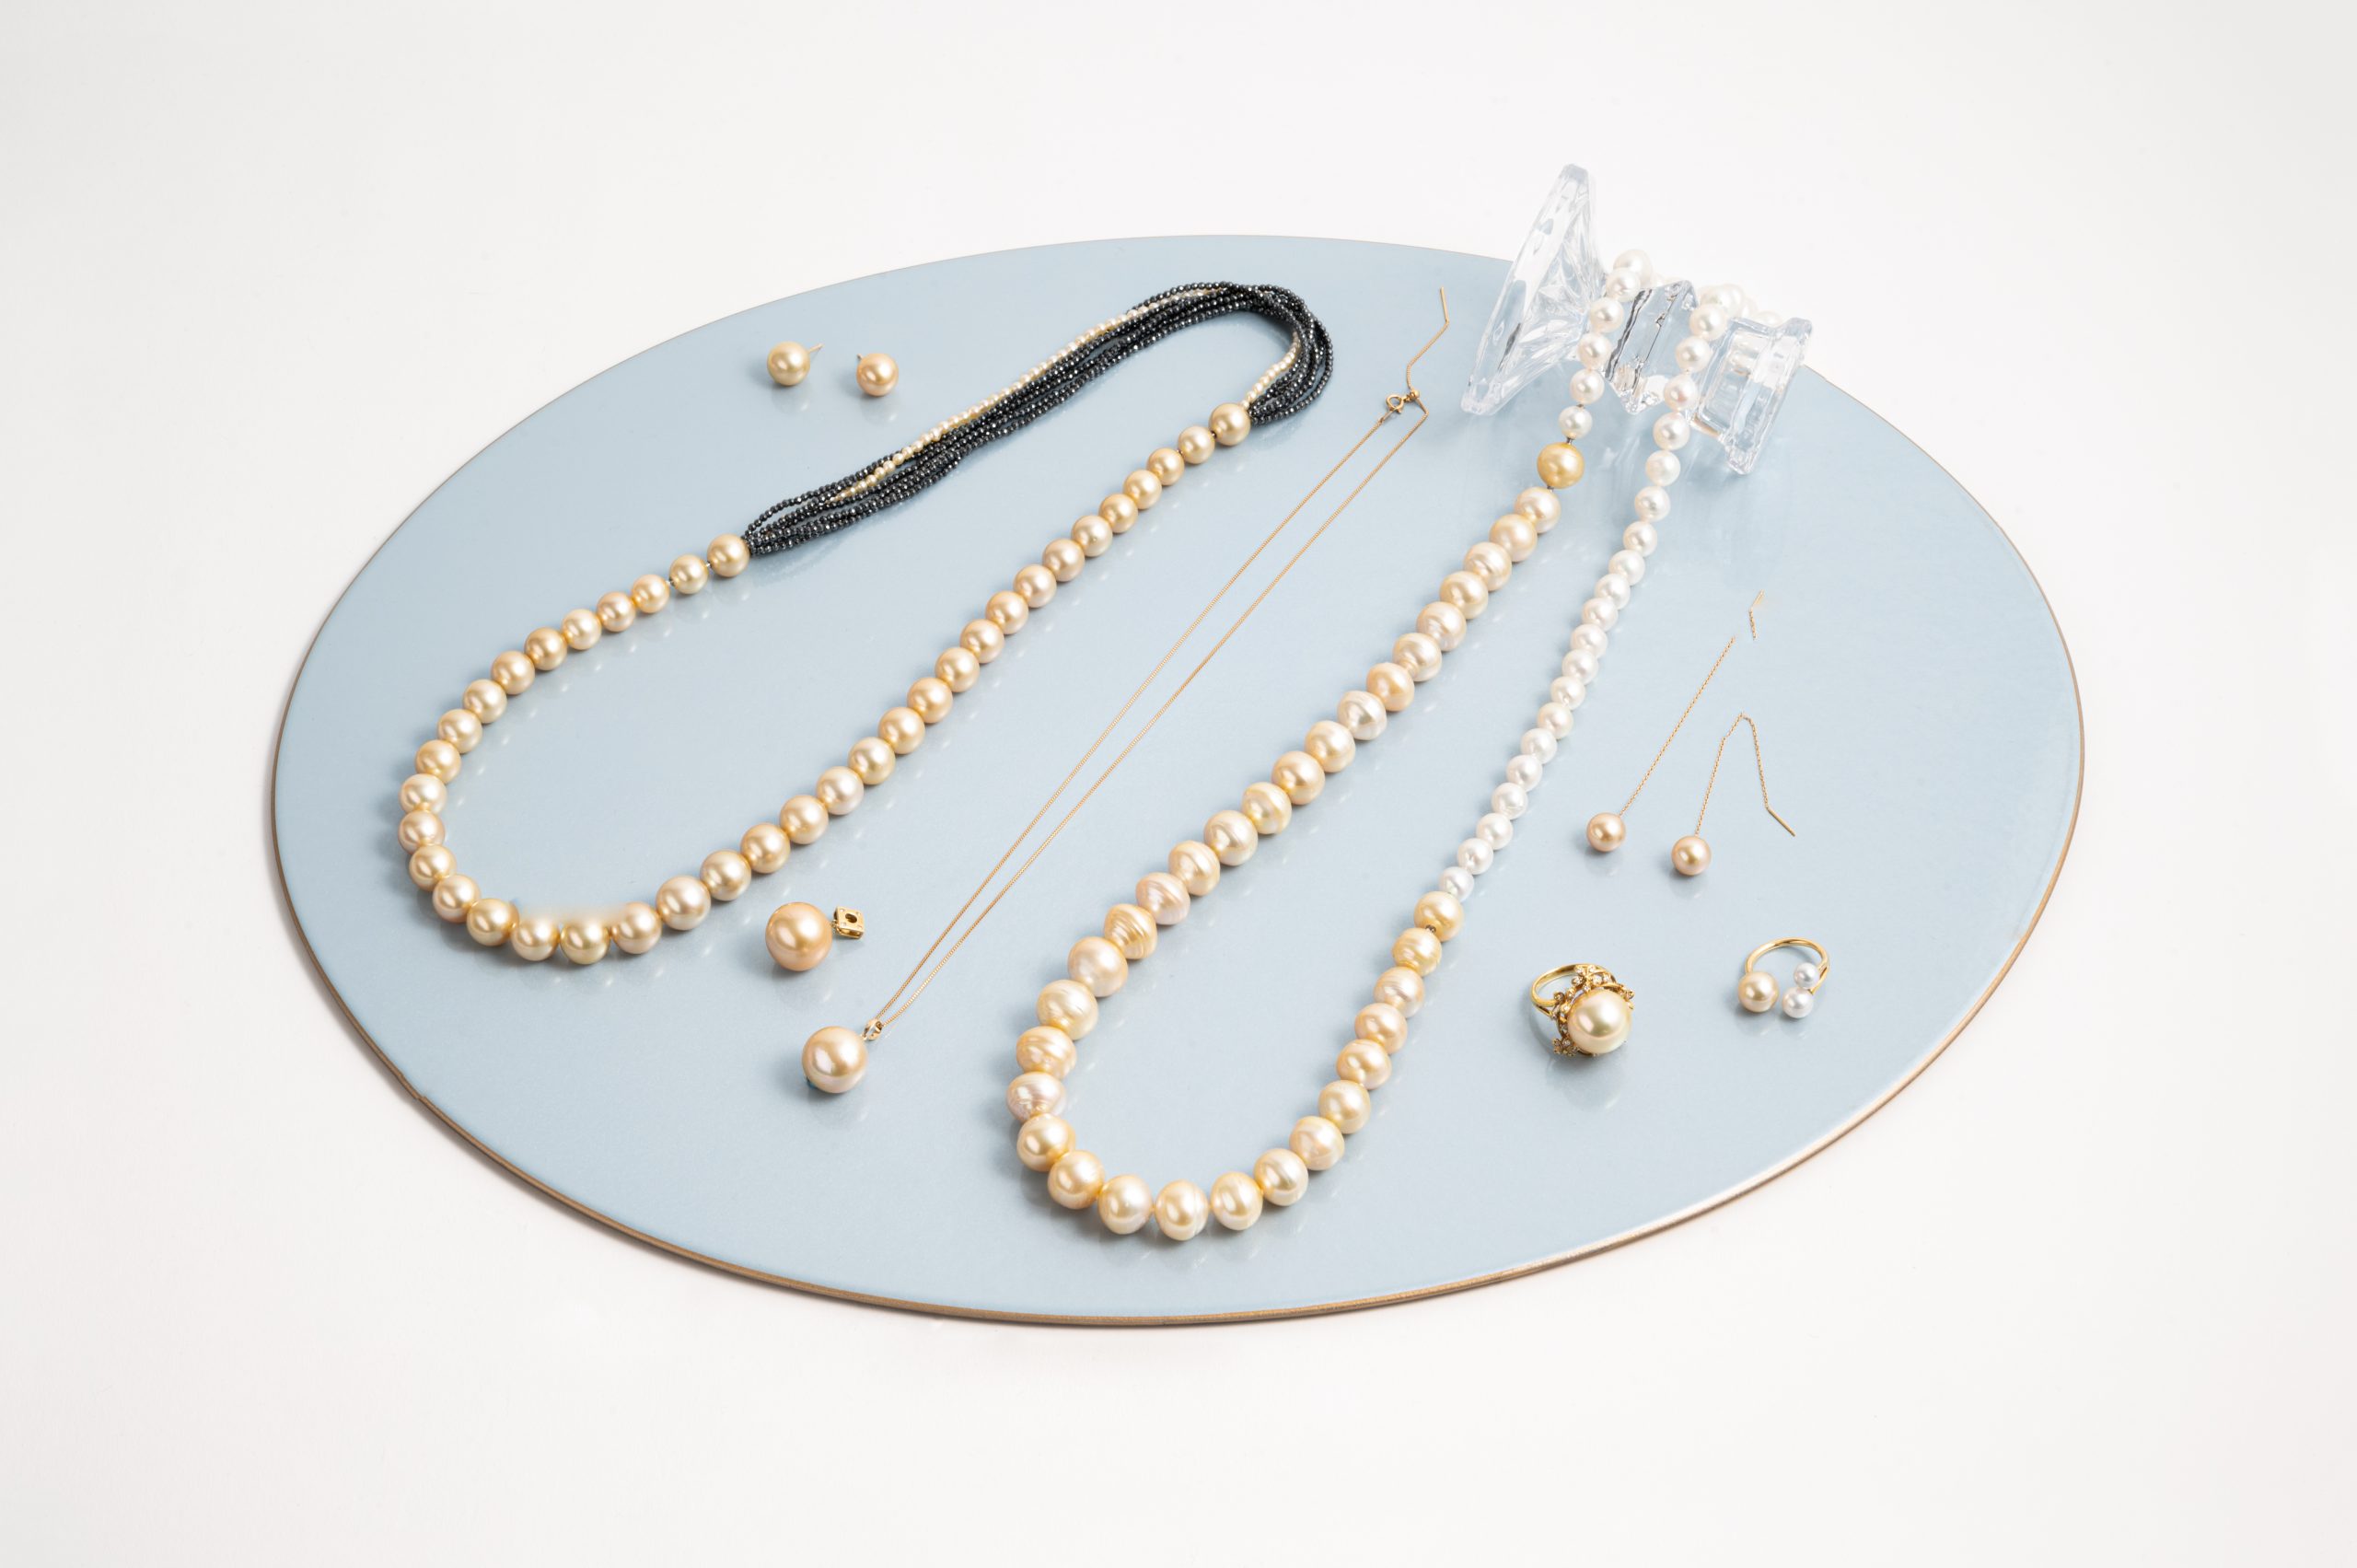 mouse pearl necklace マウスパールネックレス | pflegeservice.org